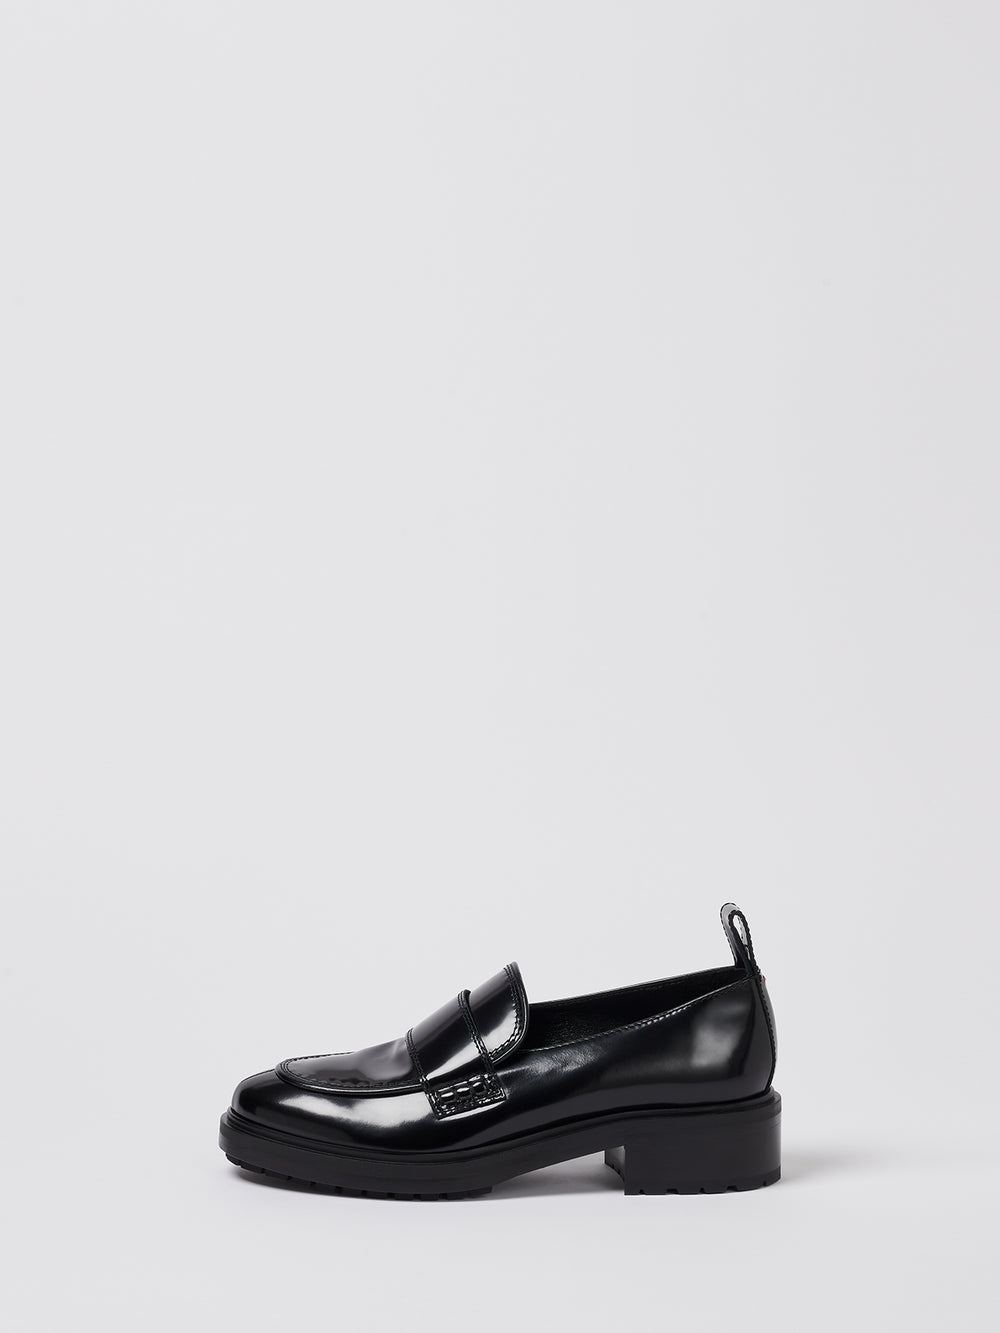 Aeyde | RUTH Black Leather Flat